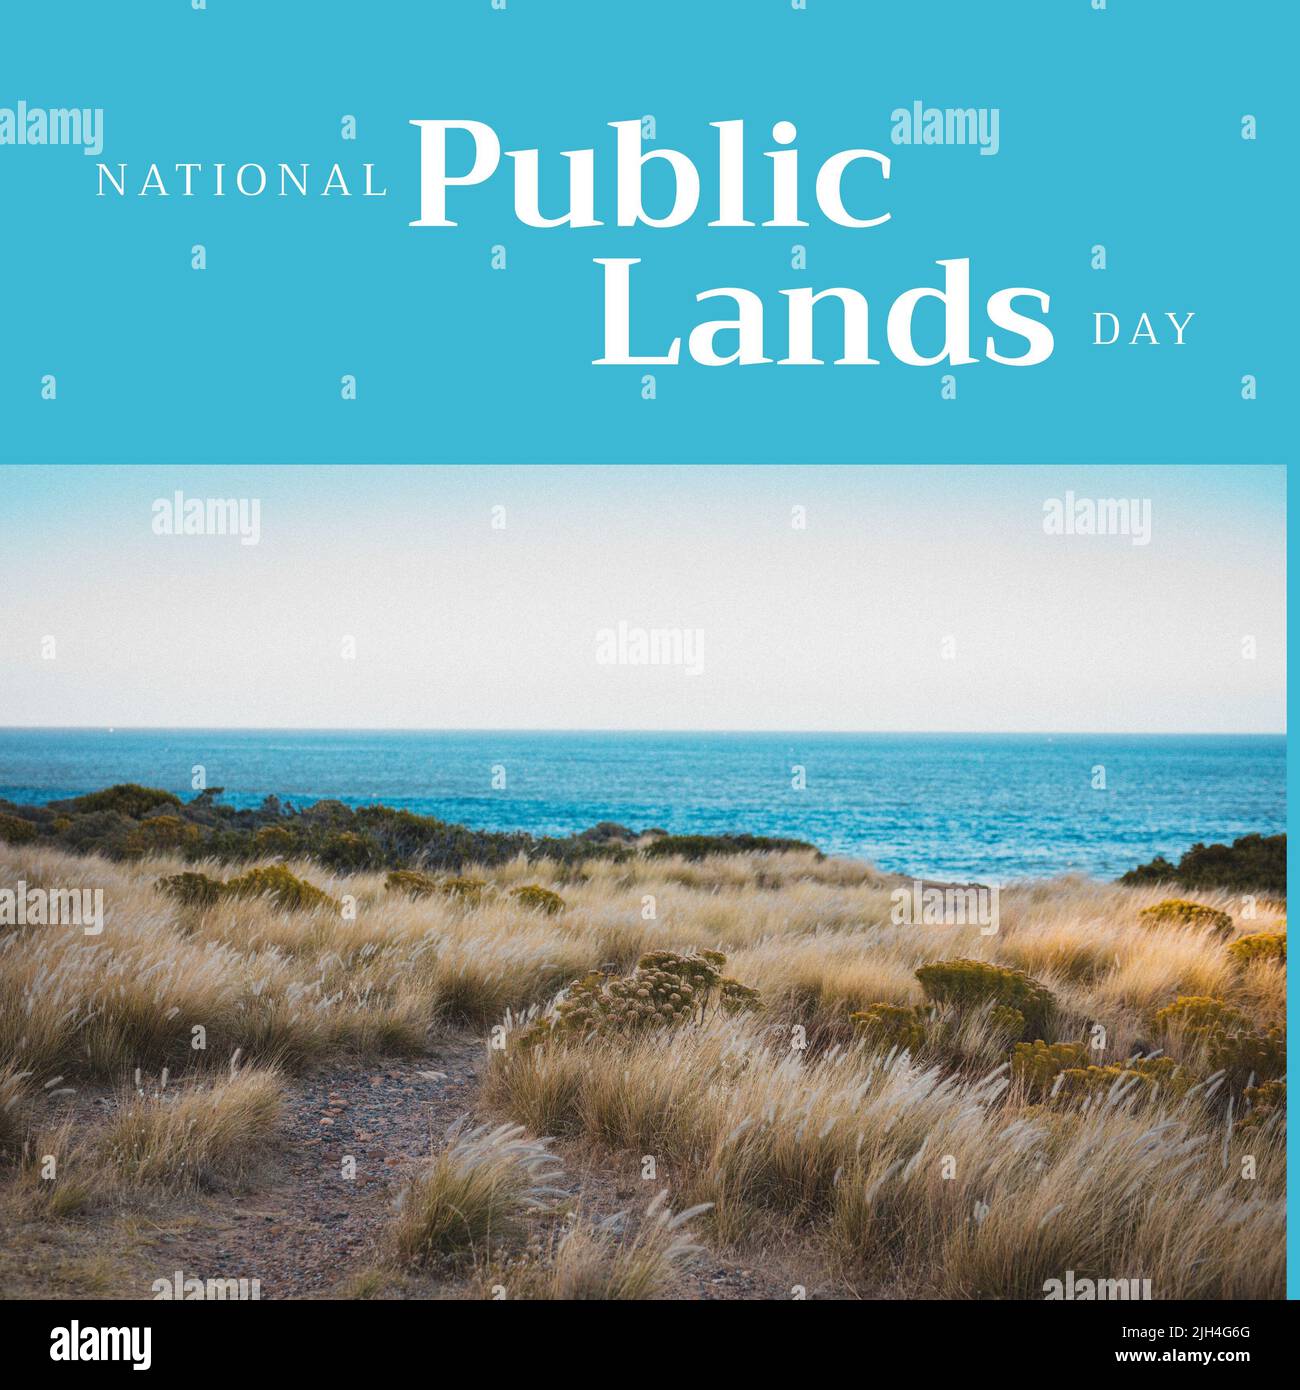 Composition of national public lands day text beach on blue background Stock Photo